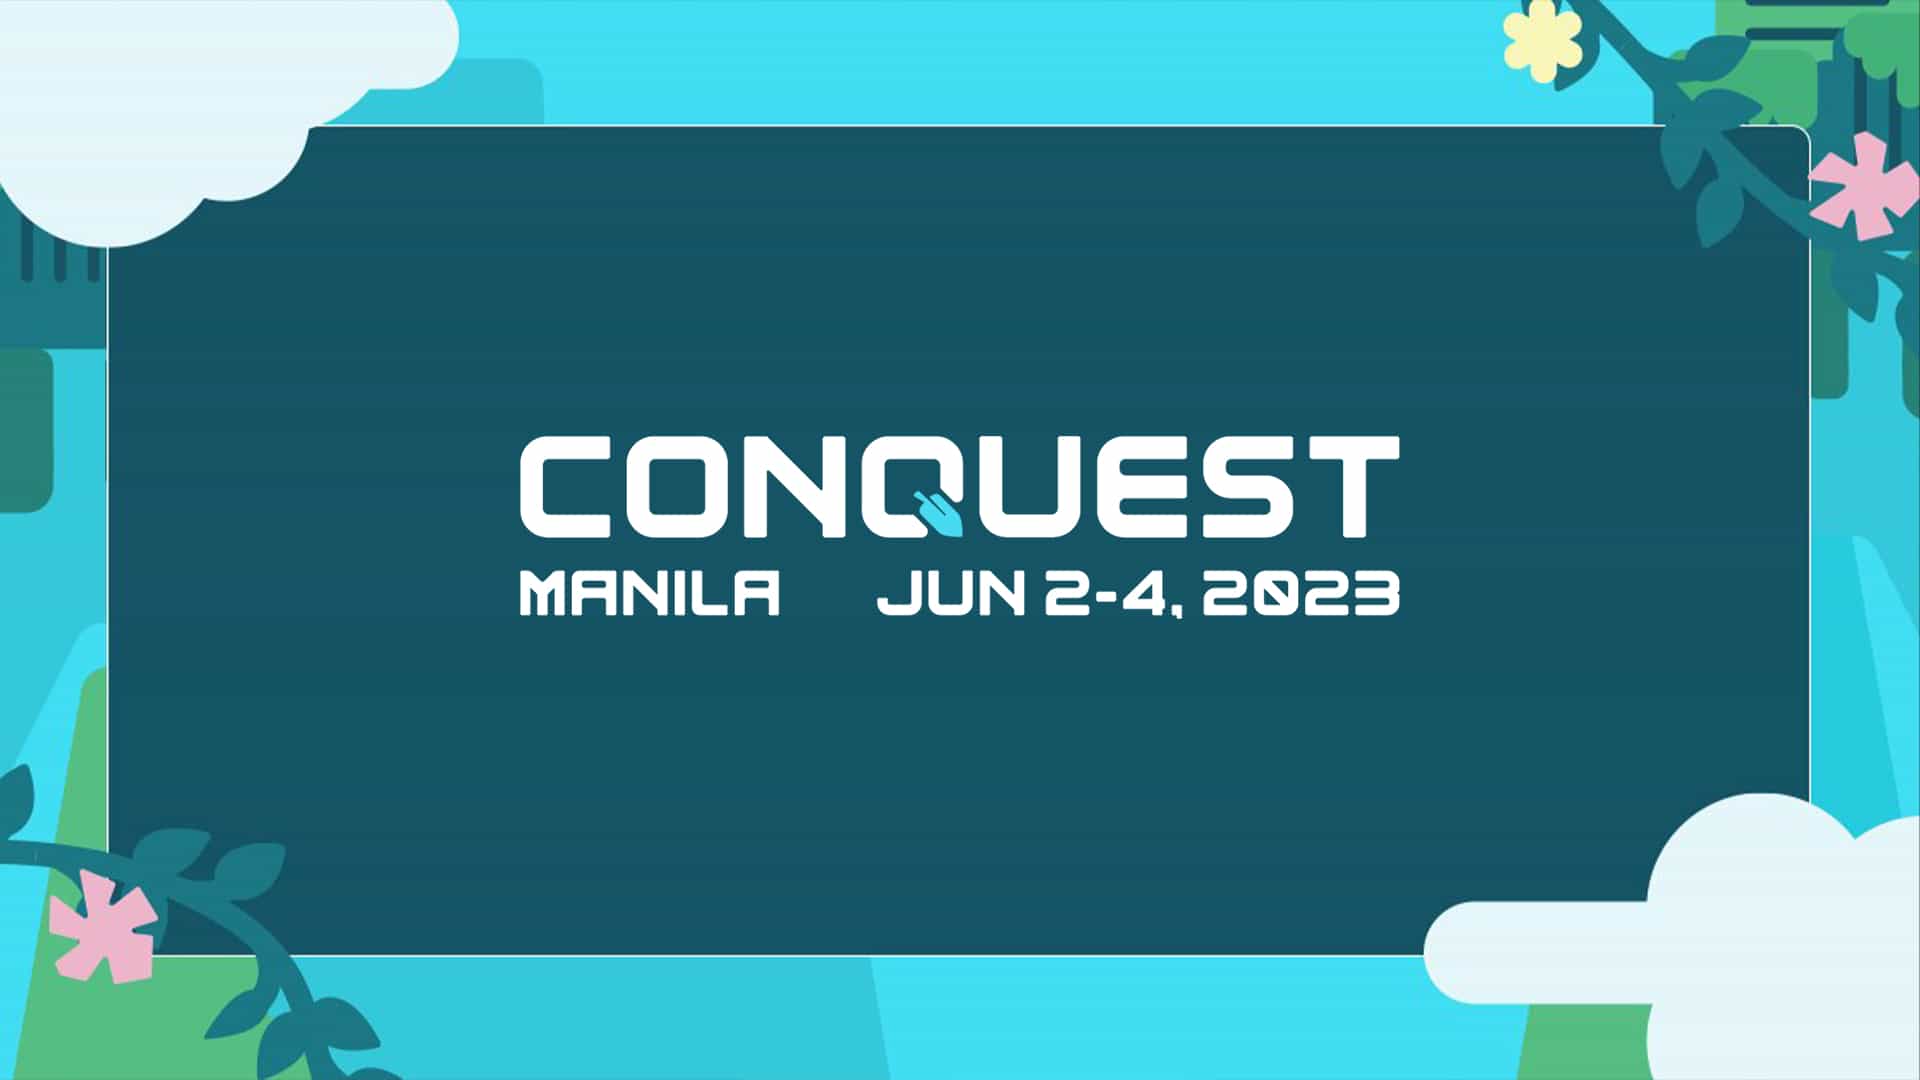 CONQuest Festival 2023 What you need to know?